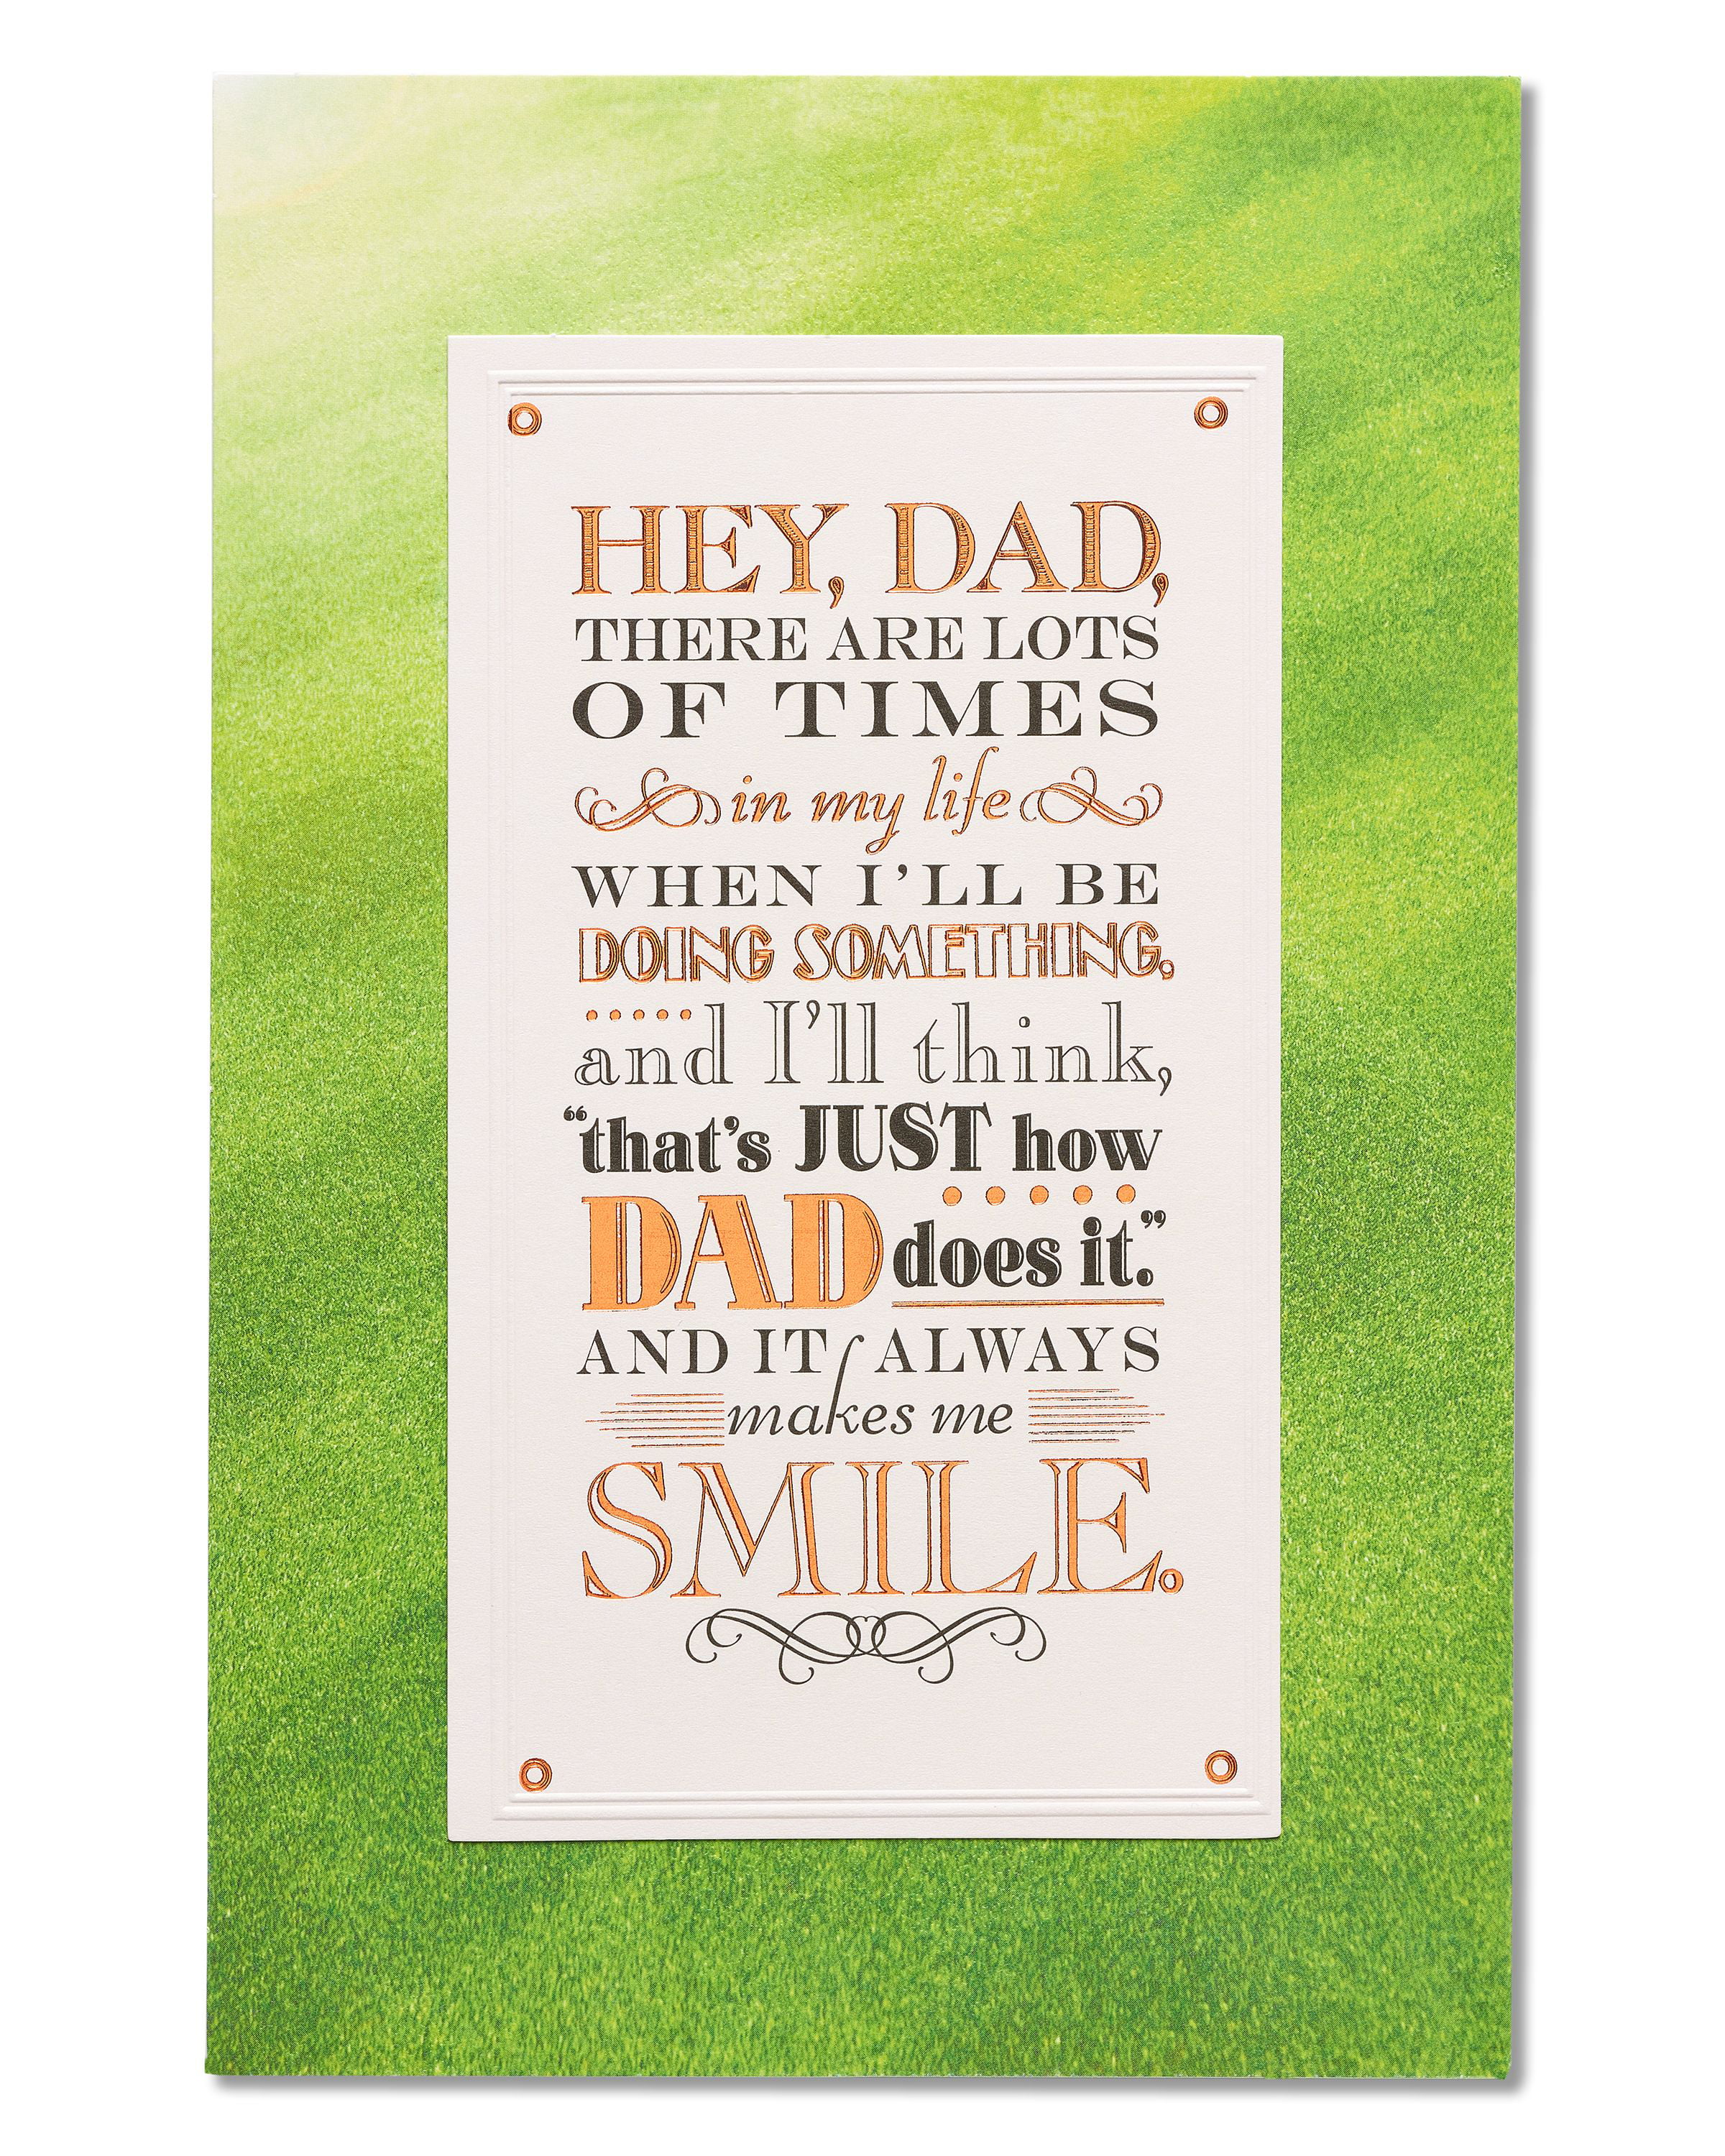 Godfather Blue Dots Birthday Card text foiled in shiny gold